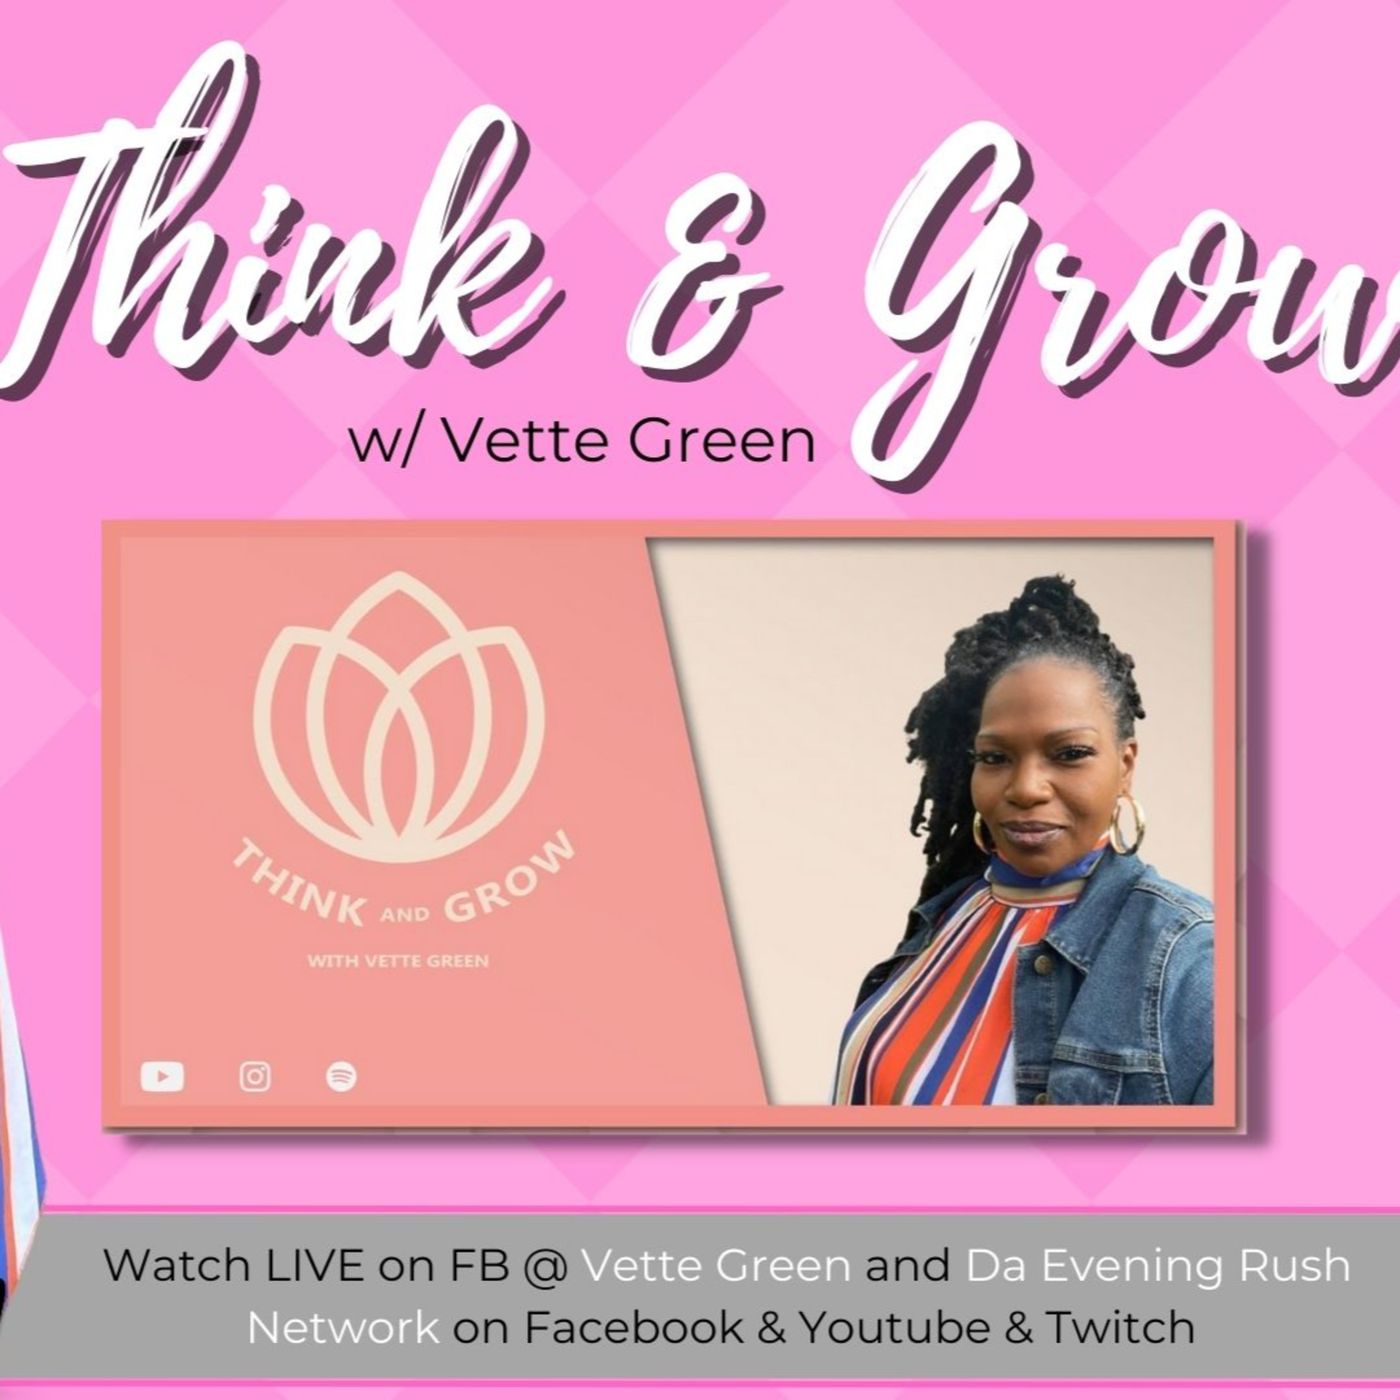 Think and Grow w/ Vette Green (S2 EP8): 716 Buffalo Weekend Recap